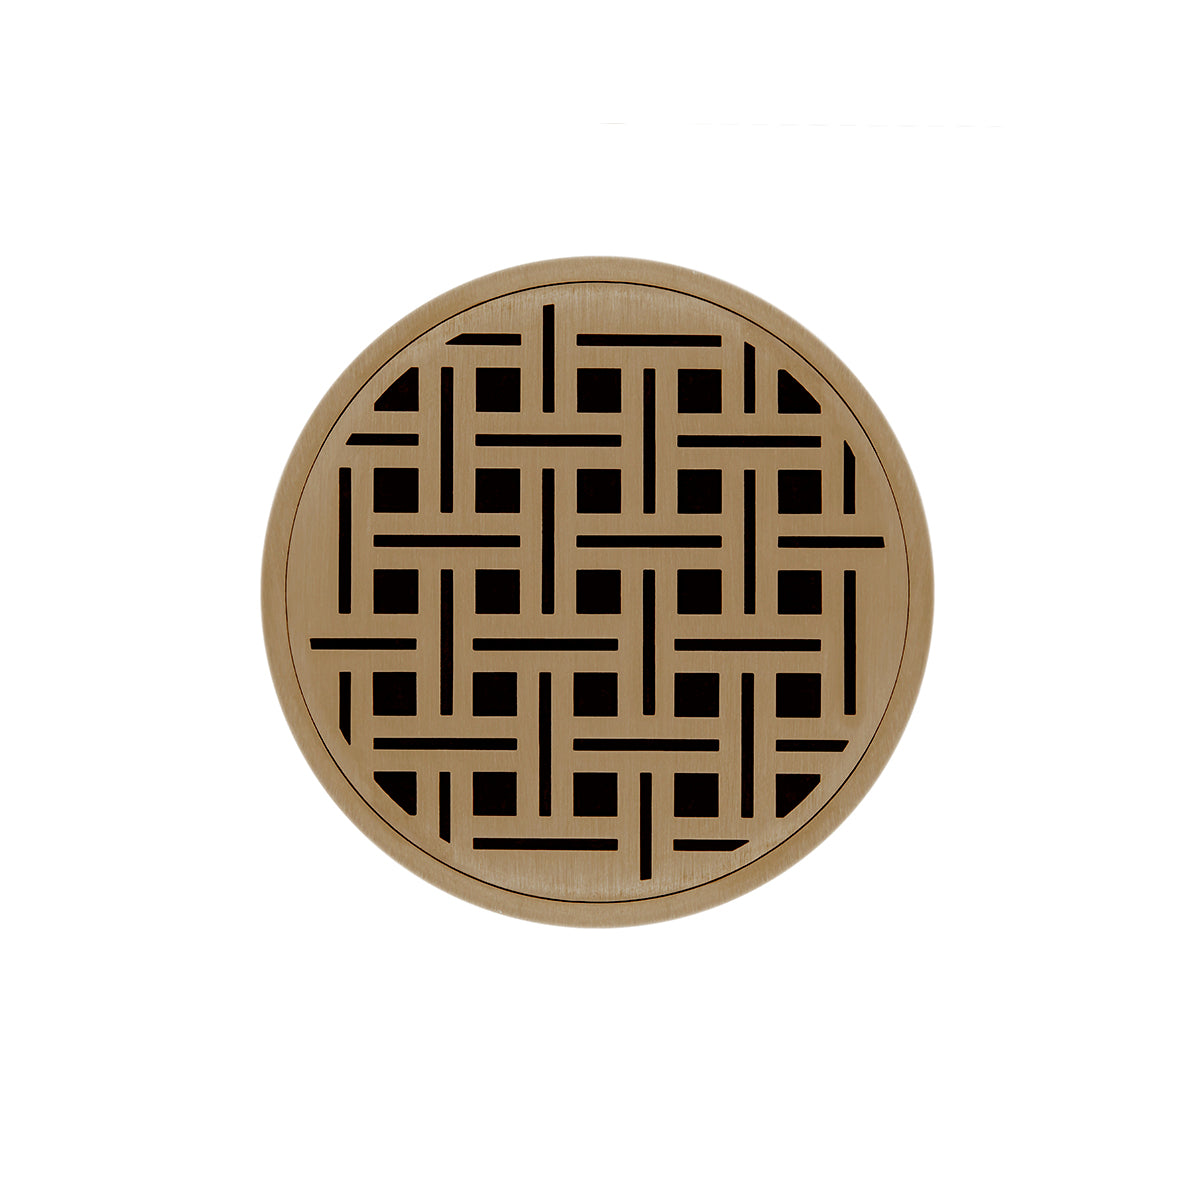 Infinity Drain 5" Round RVD 5 High Flow Premium Center Drain Kit with Weave Pattern Decorative Plate with Cast Iron Drain Body, 3" No-Hub Outlet